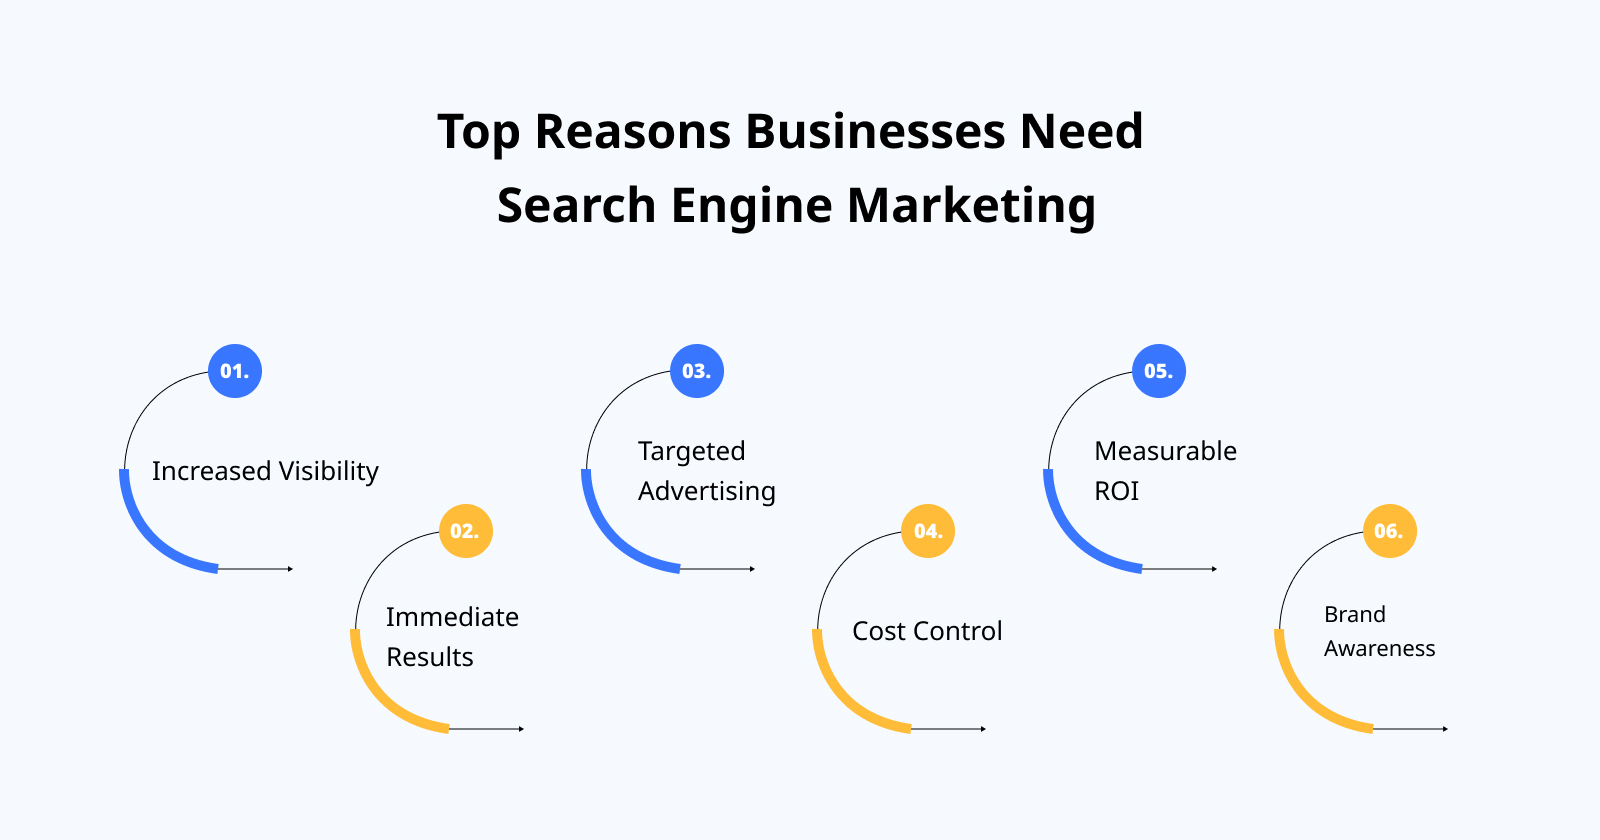 Top Reasons Businesses Need Search Engine Marketing